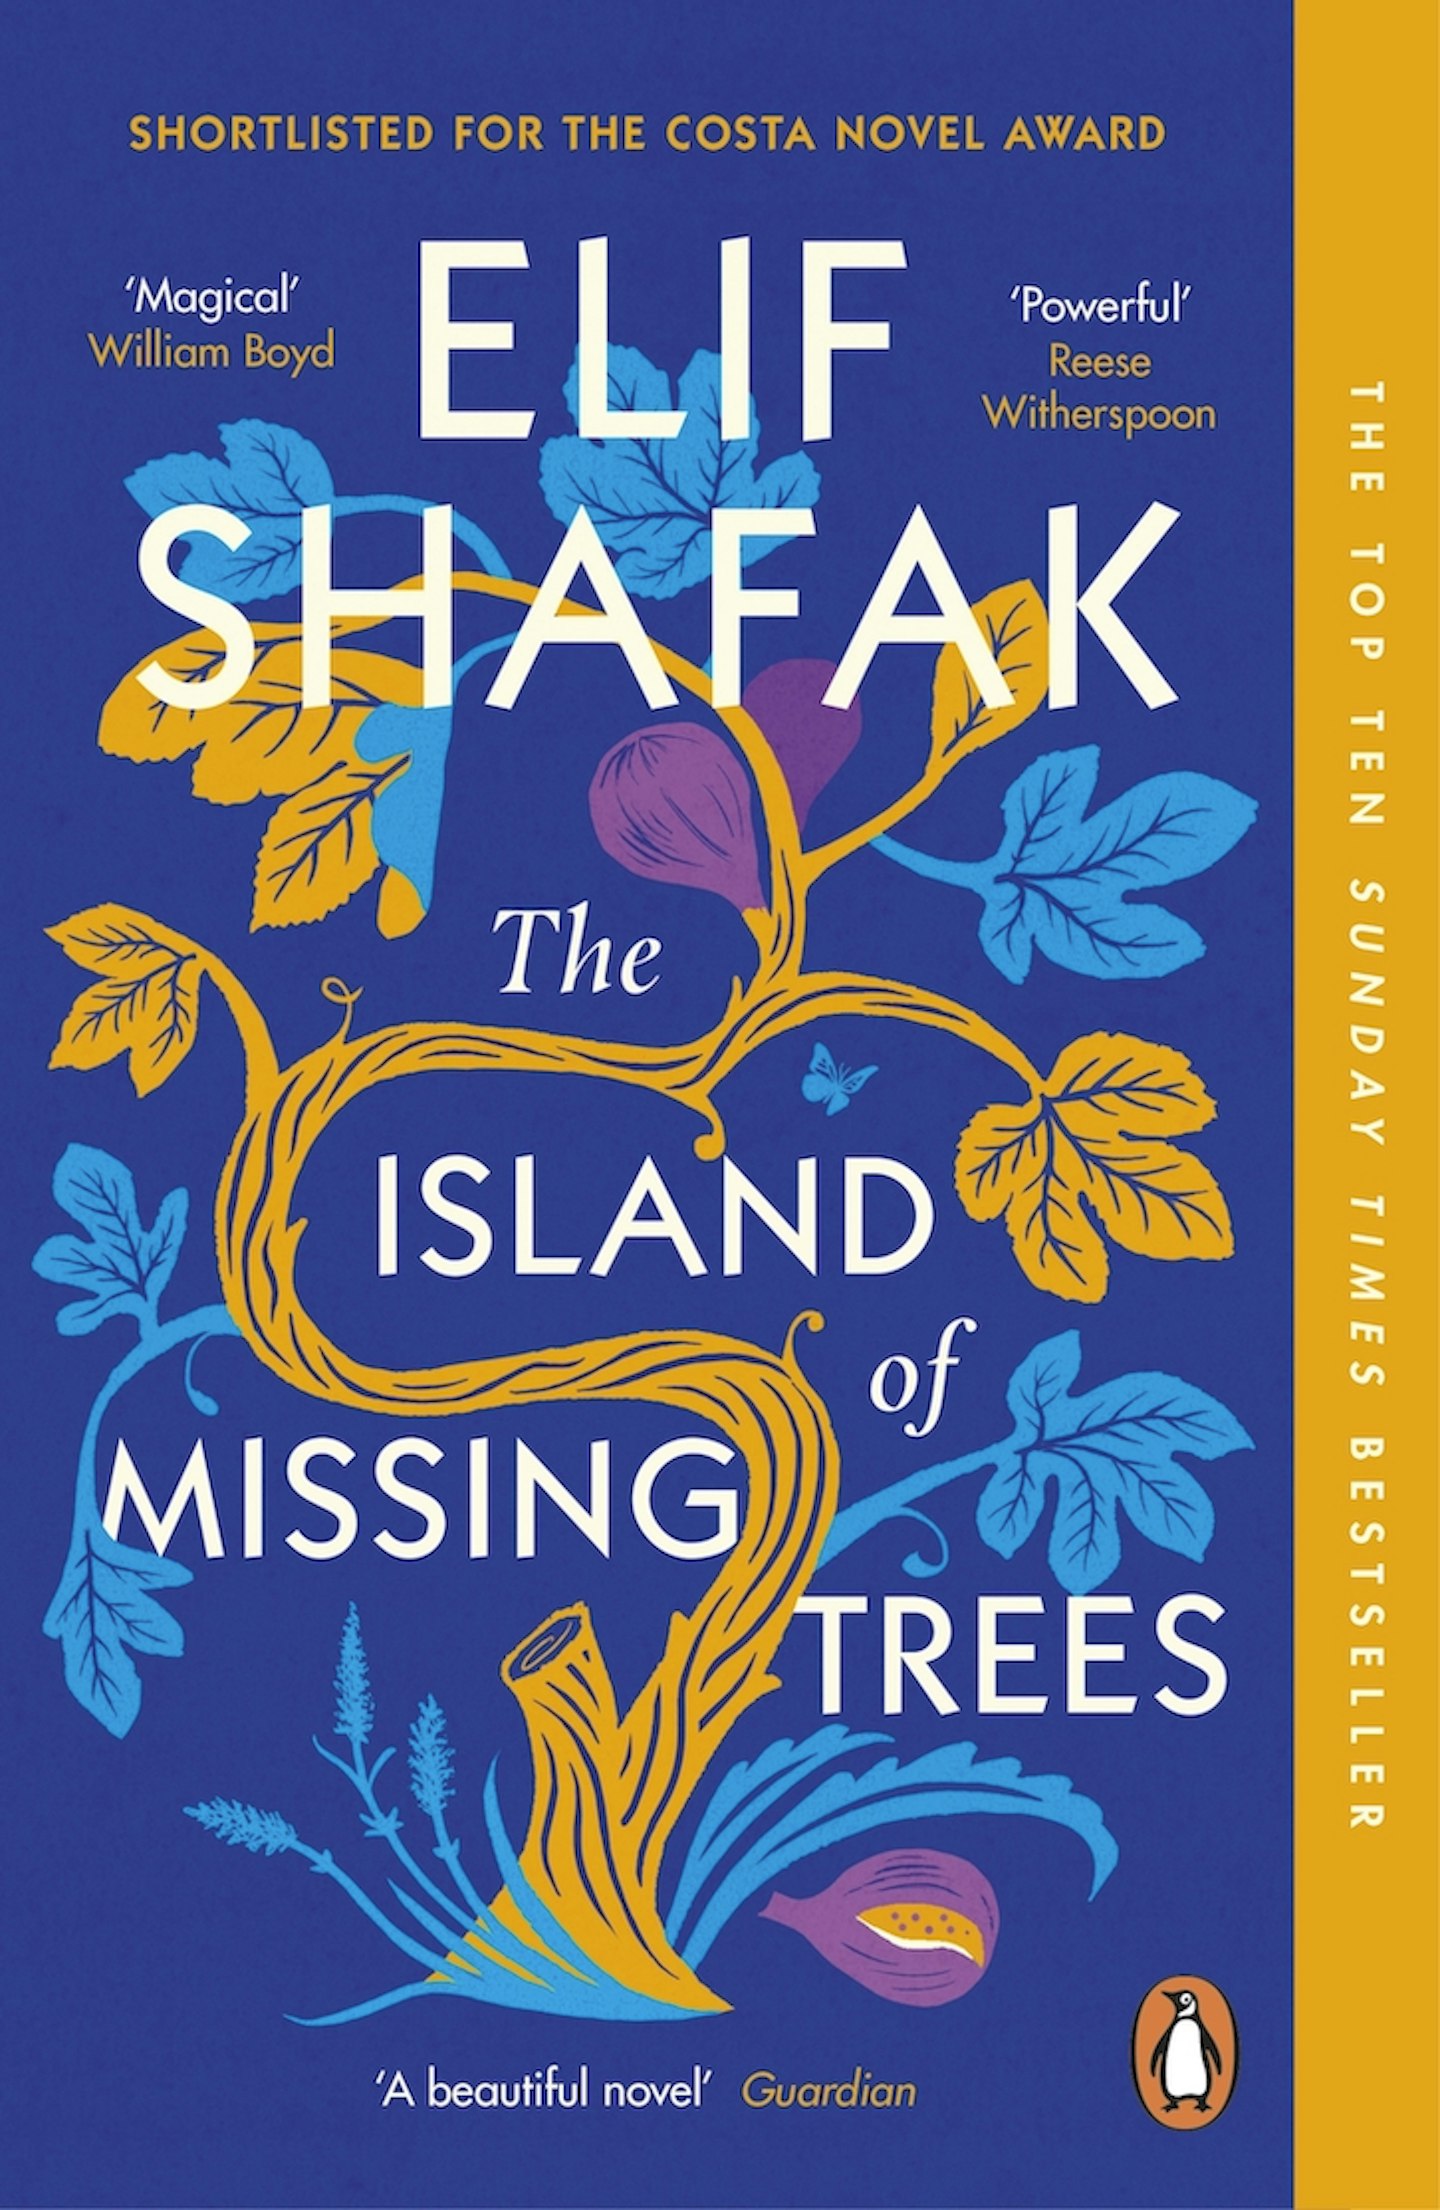 THE ISLAND OF MISSING TREES by Elif Shafak